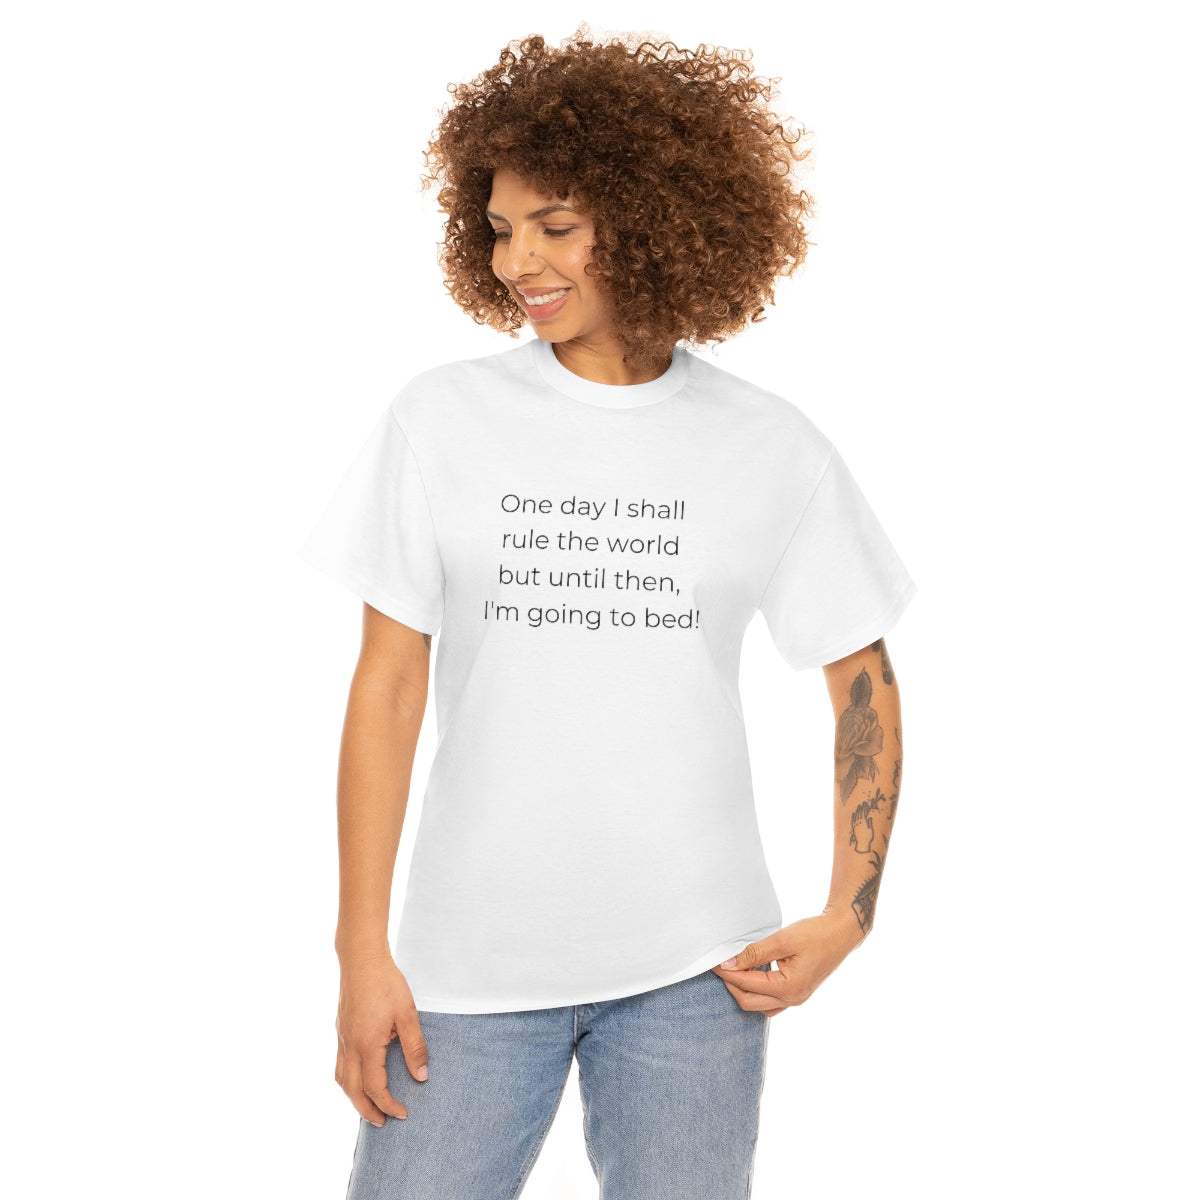 Chronic Pain, Funny Tshirts, Chronic Pain Shirts, Funny Quote Shirts, Spoonie Shirt, Occupational Therapy Shirt, Fibromyalgia, Always Tired - The Good Life Vibe